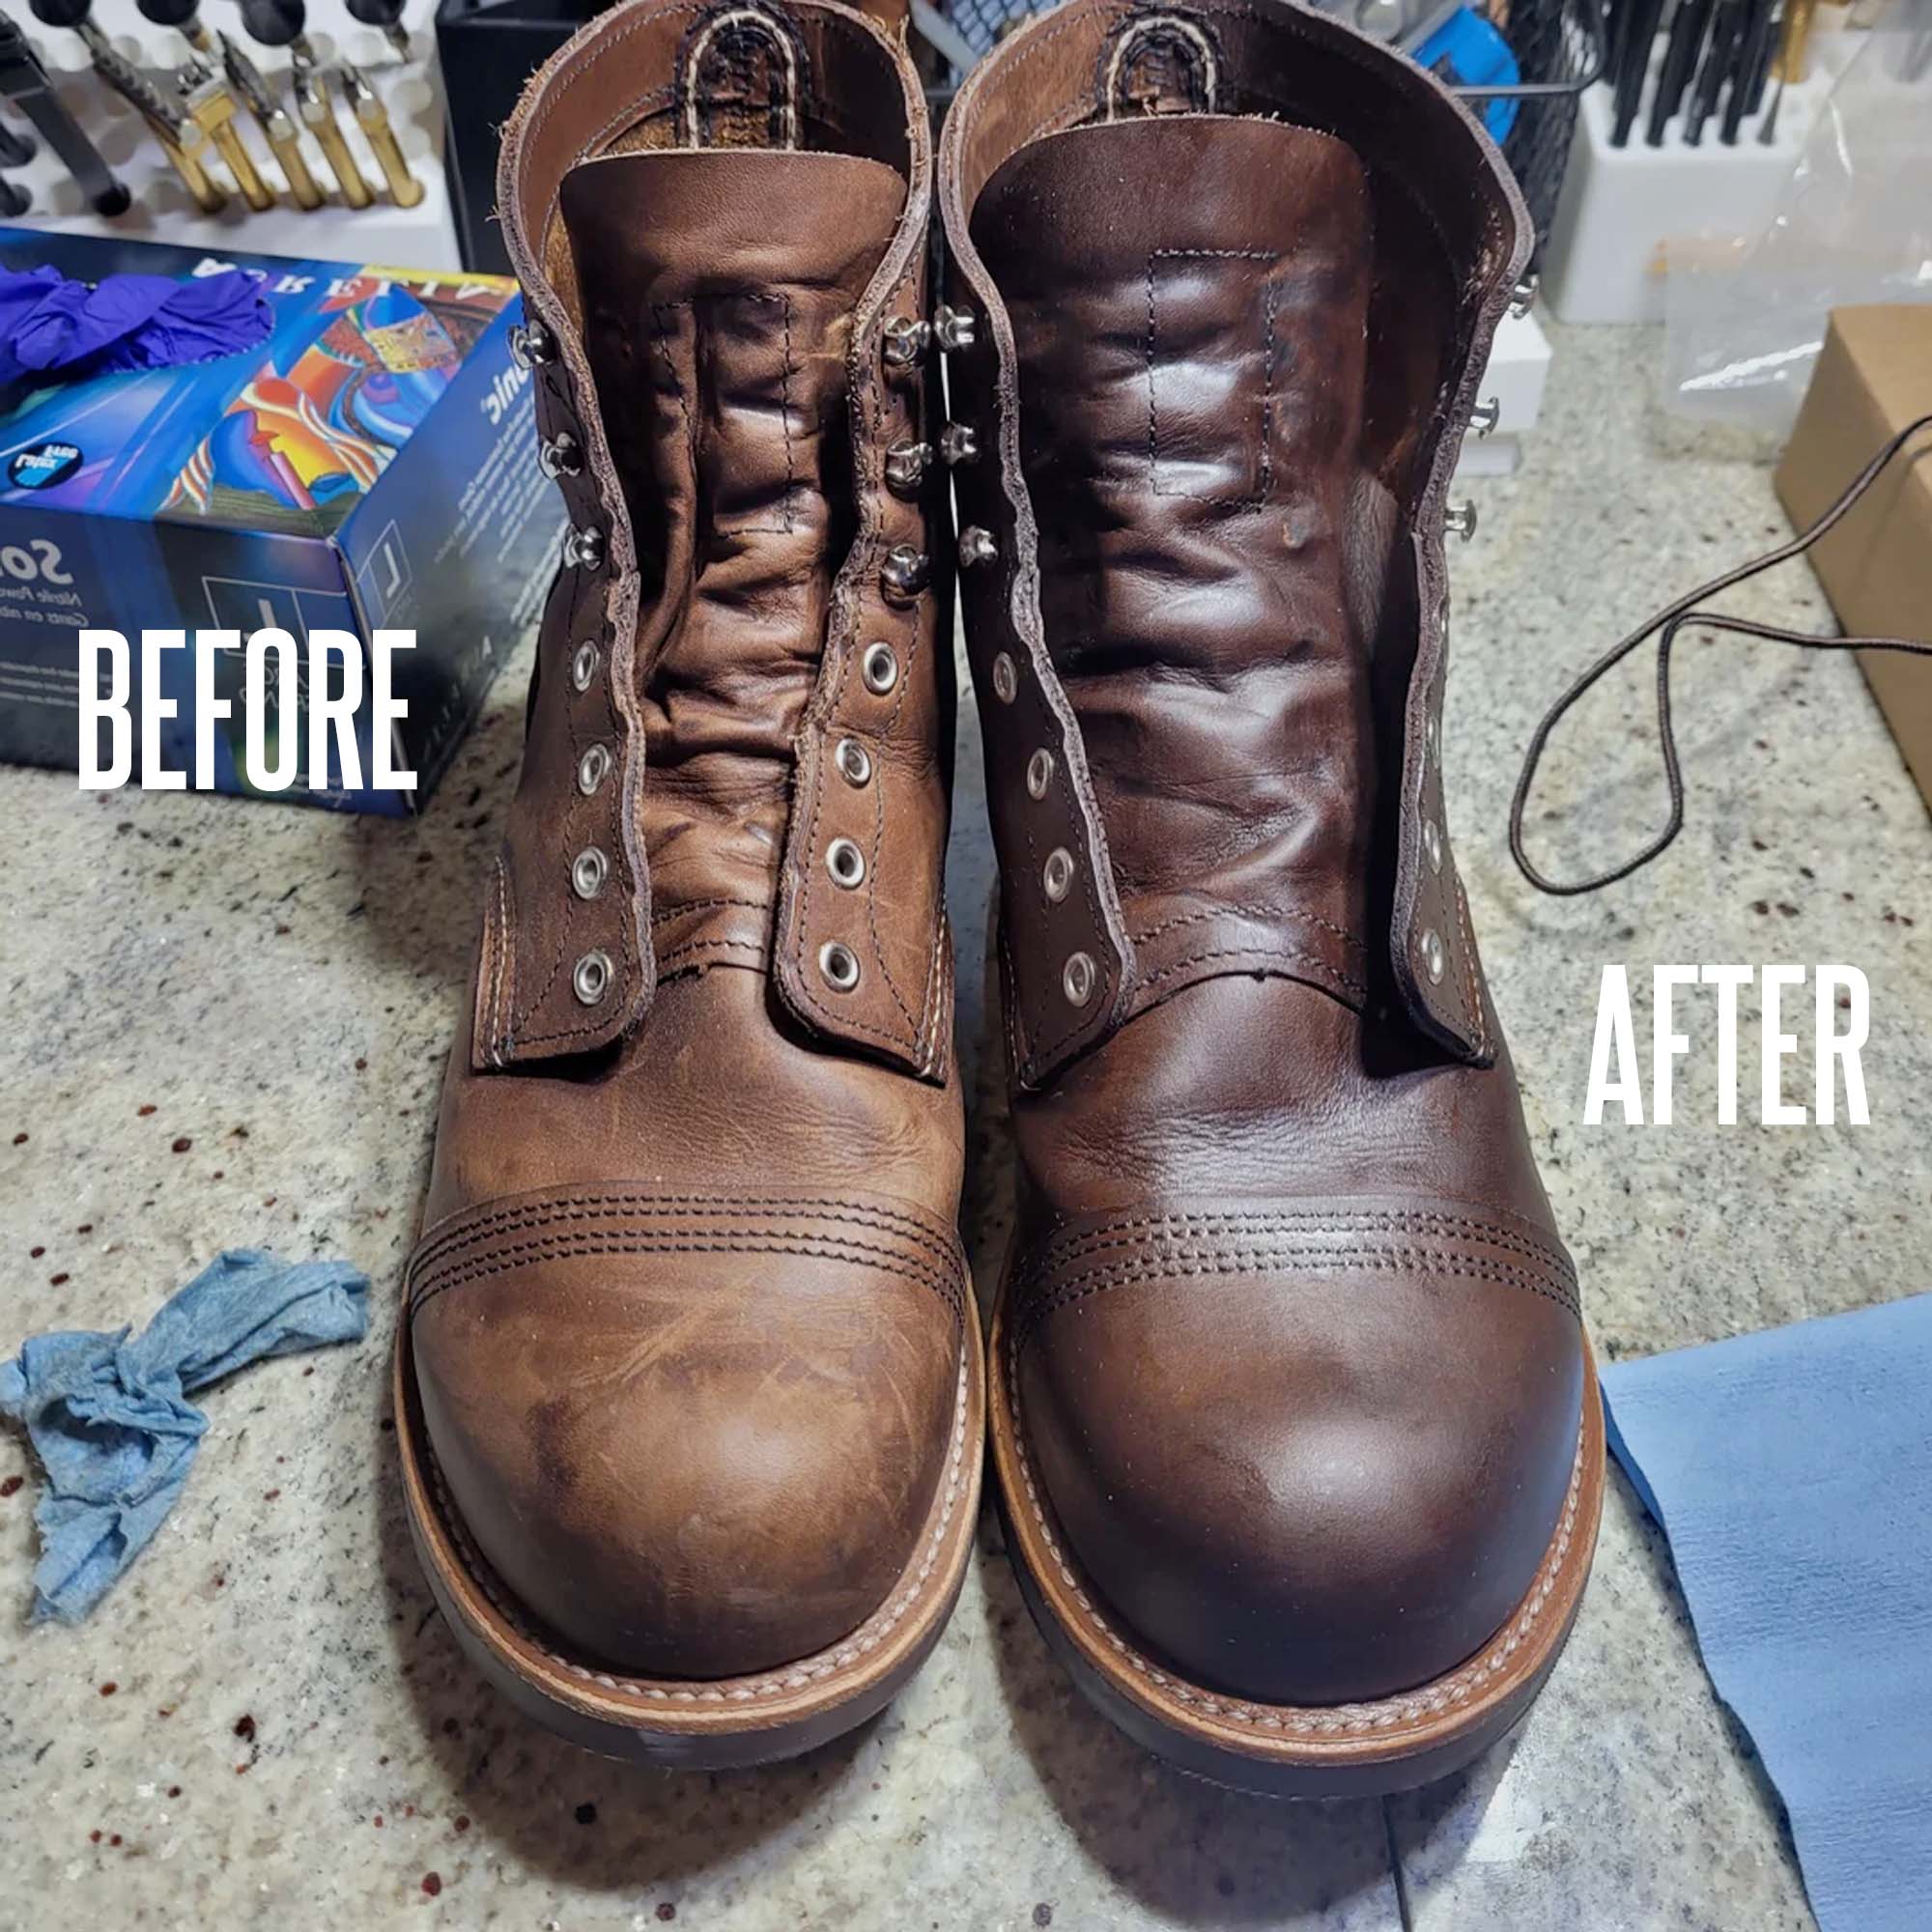 griffin mink oil before and after